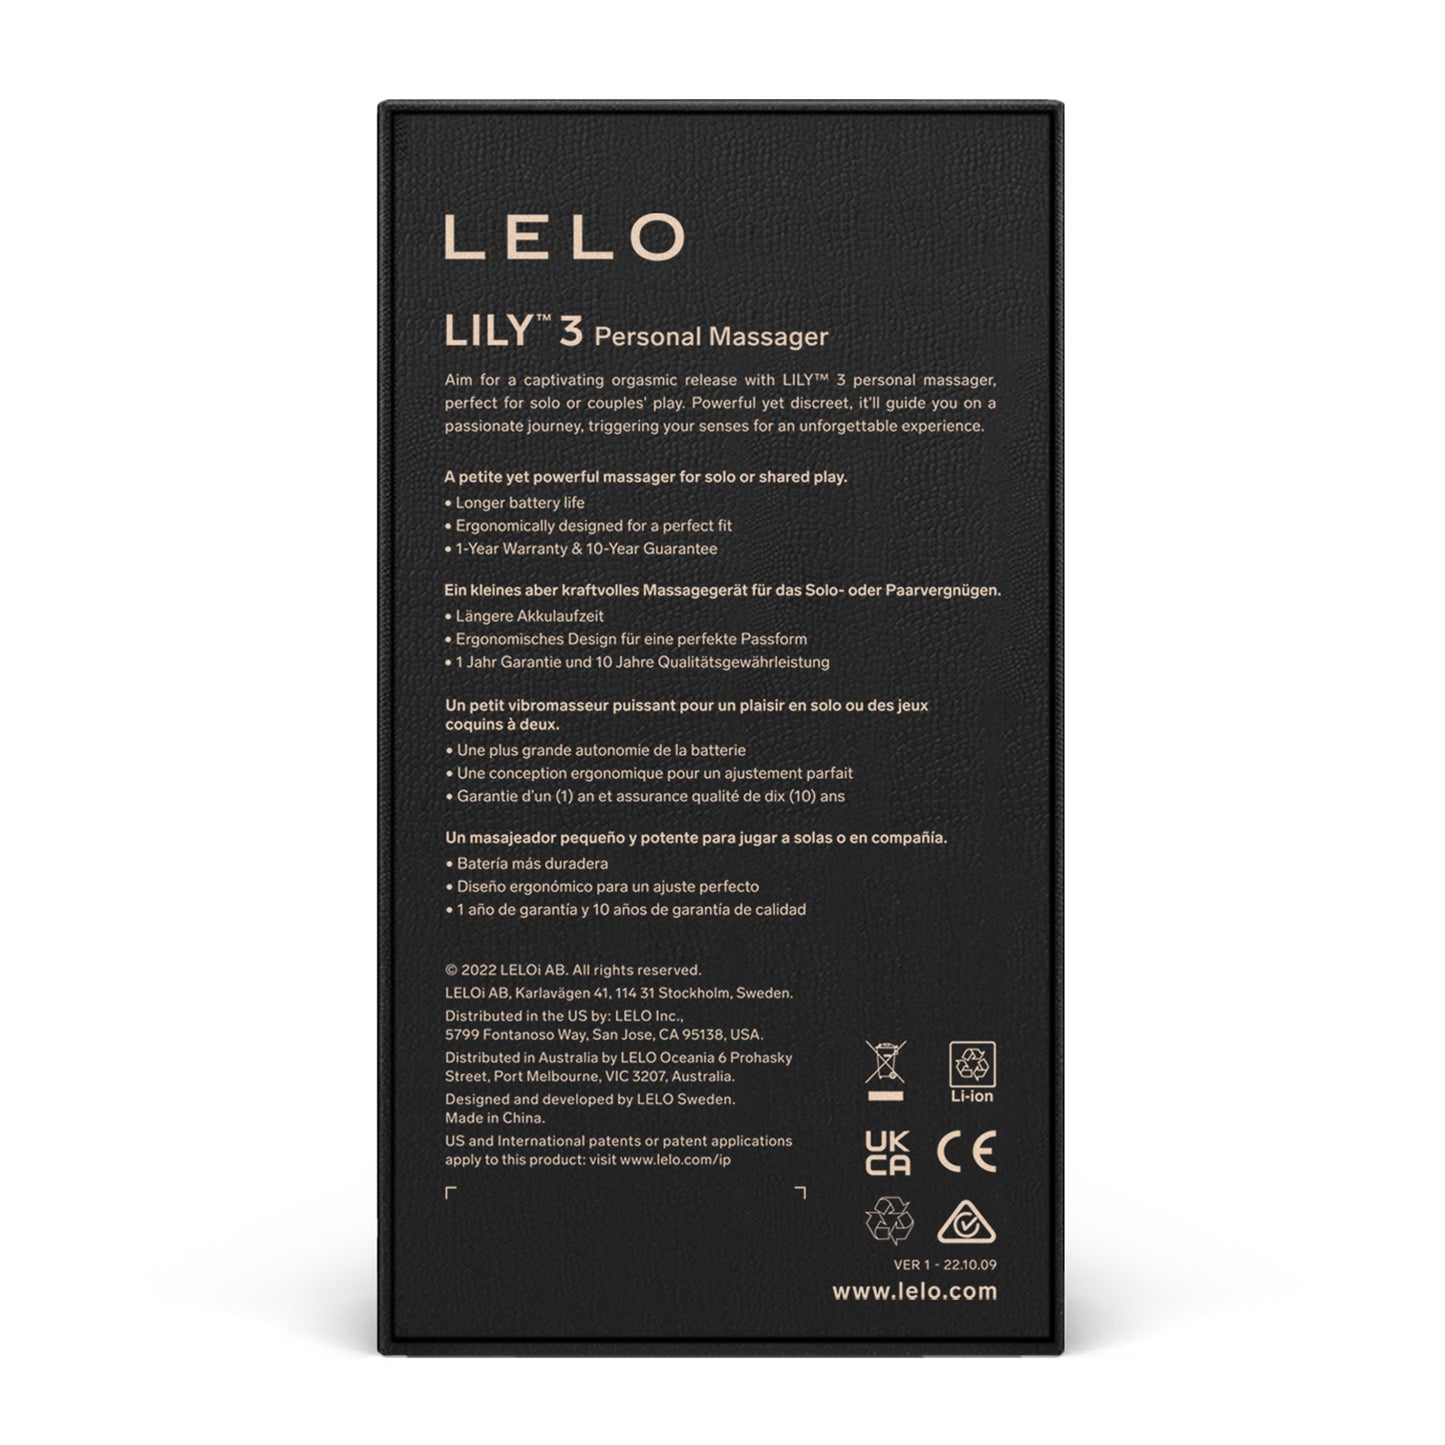 Lelo - Lily 3 Personal Massager Polar Green - 1